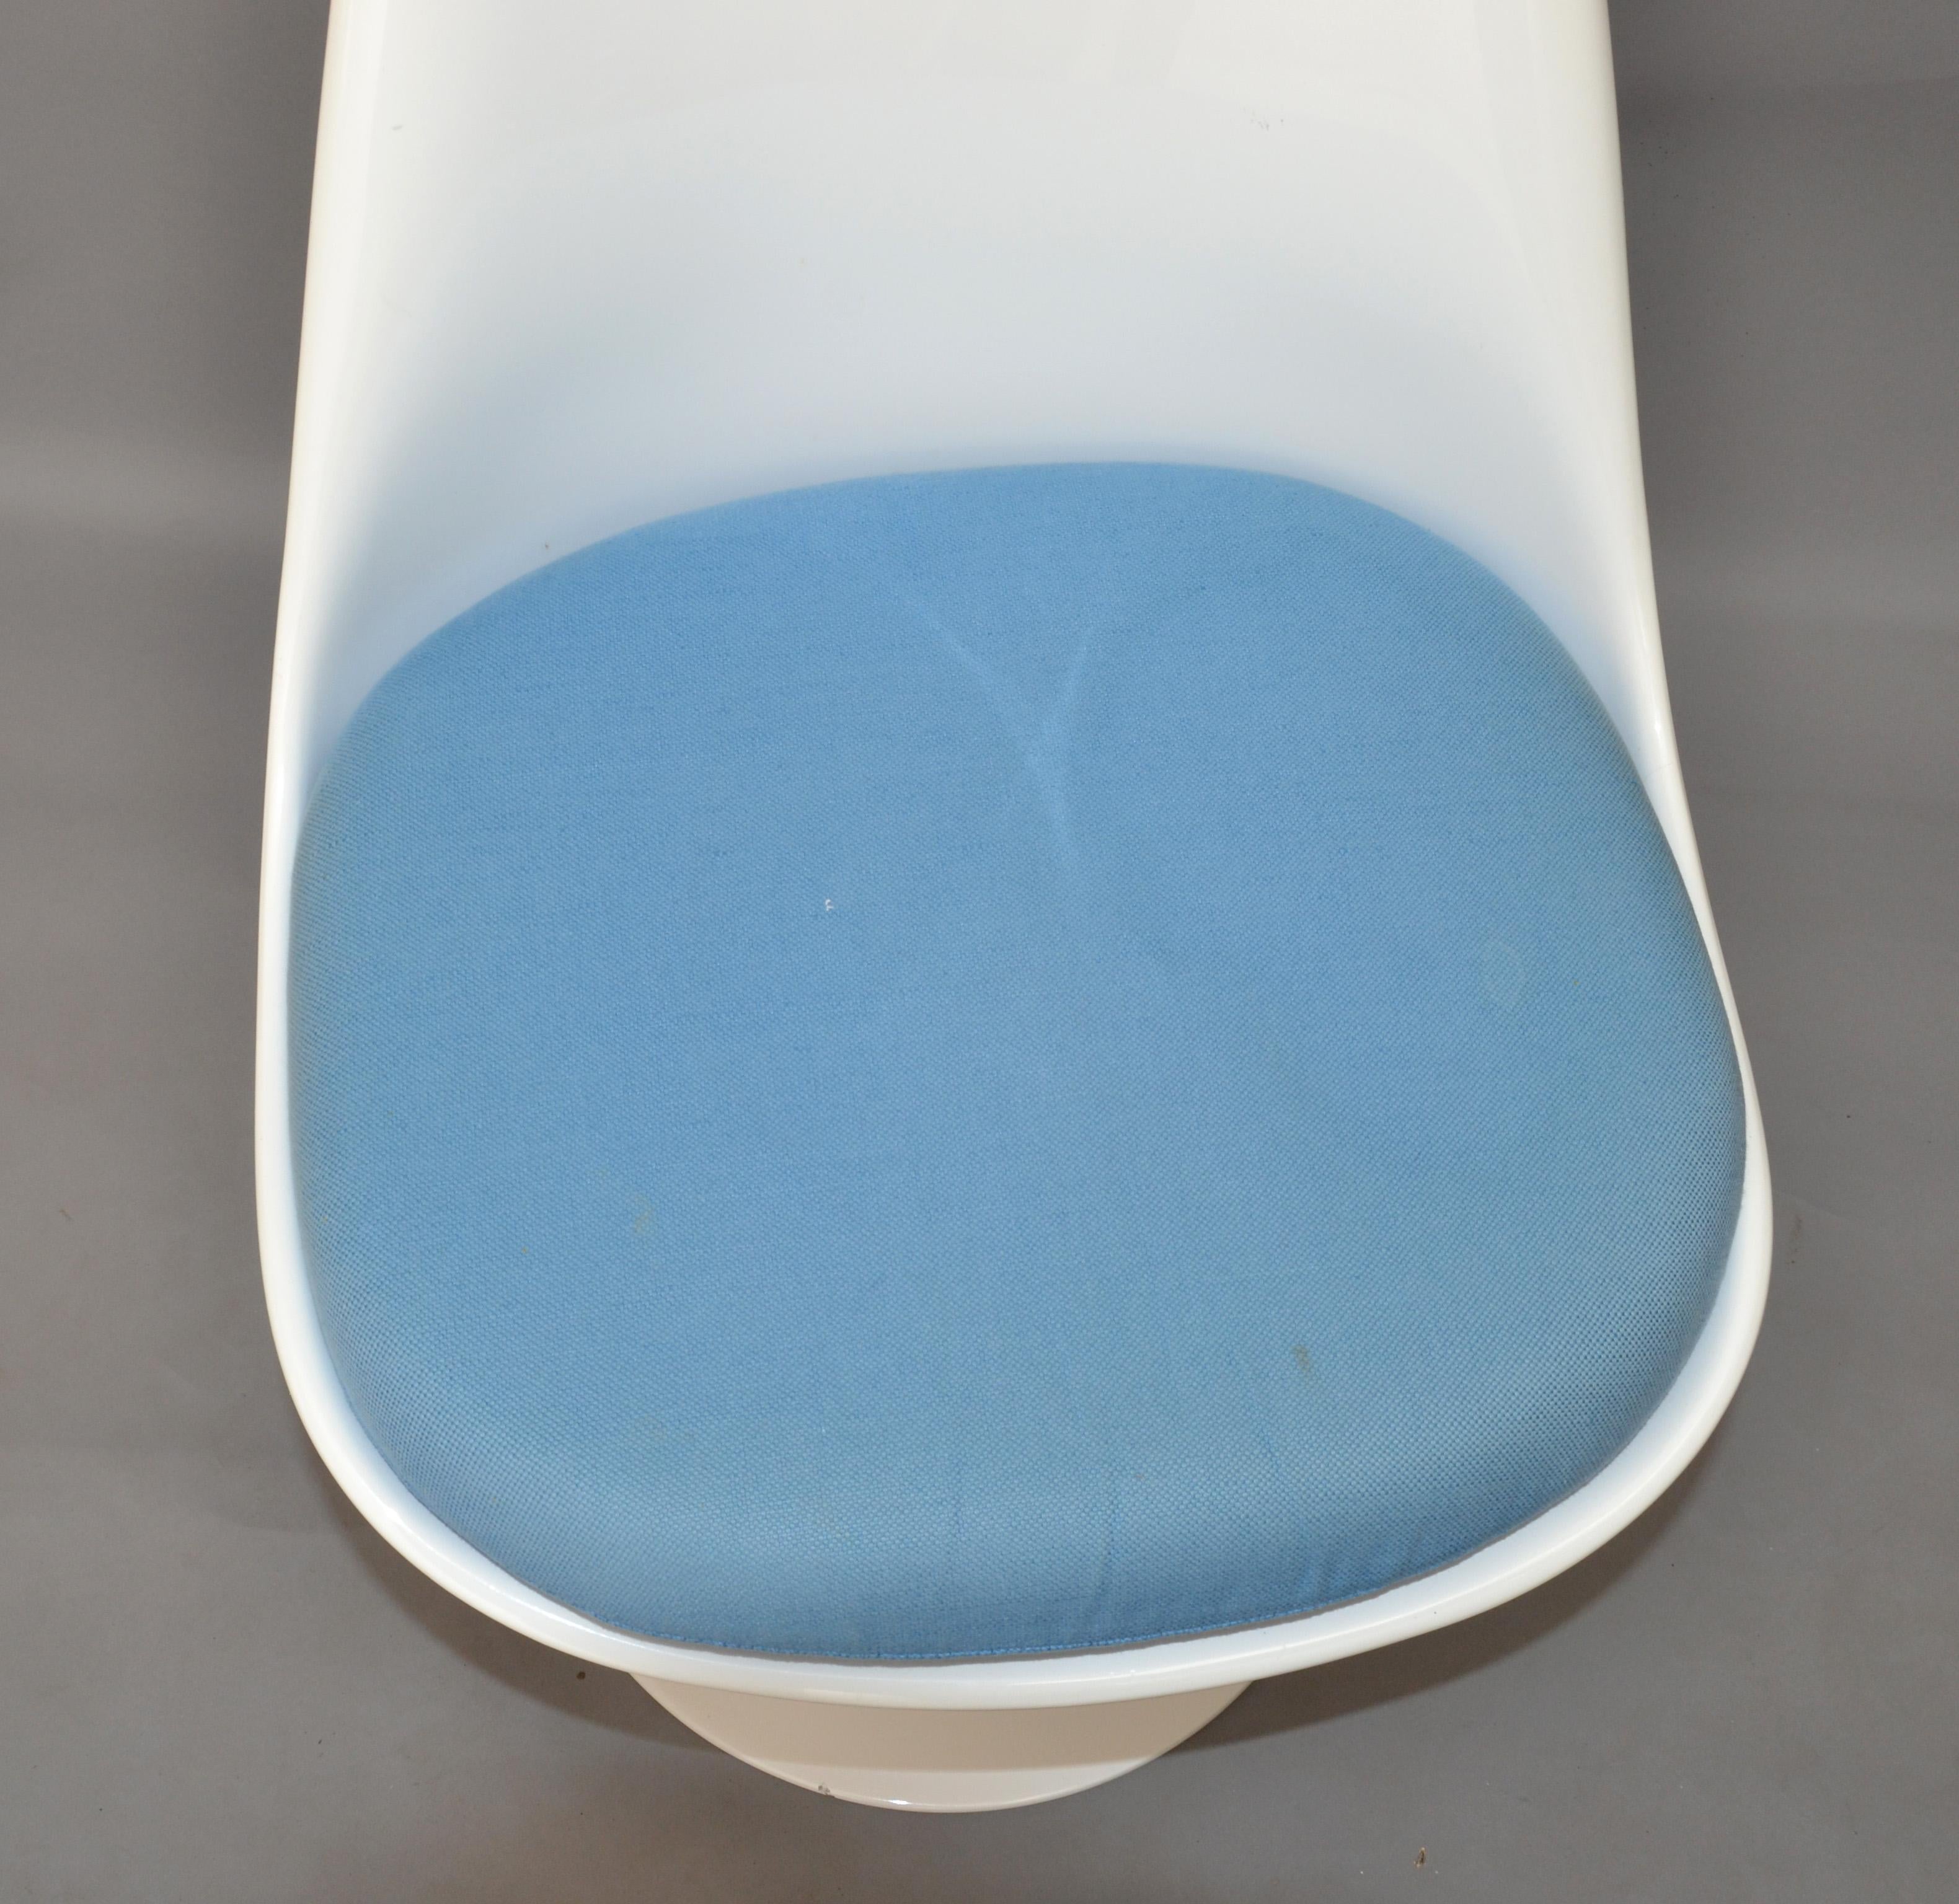 Late 20th Century Tulip Swivel Chair in the Style of Knoll Attributed to Eero Saarinen White Blue